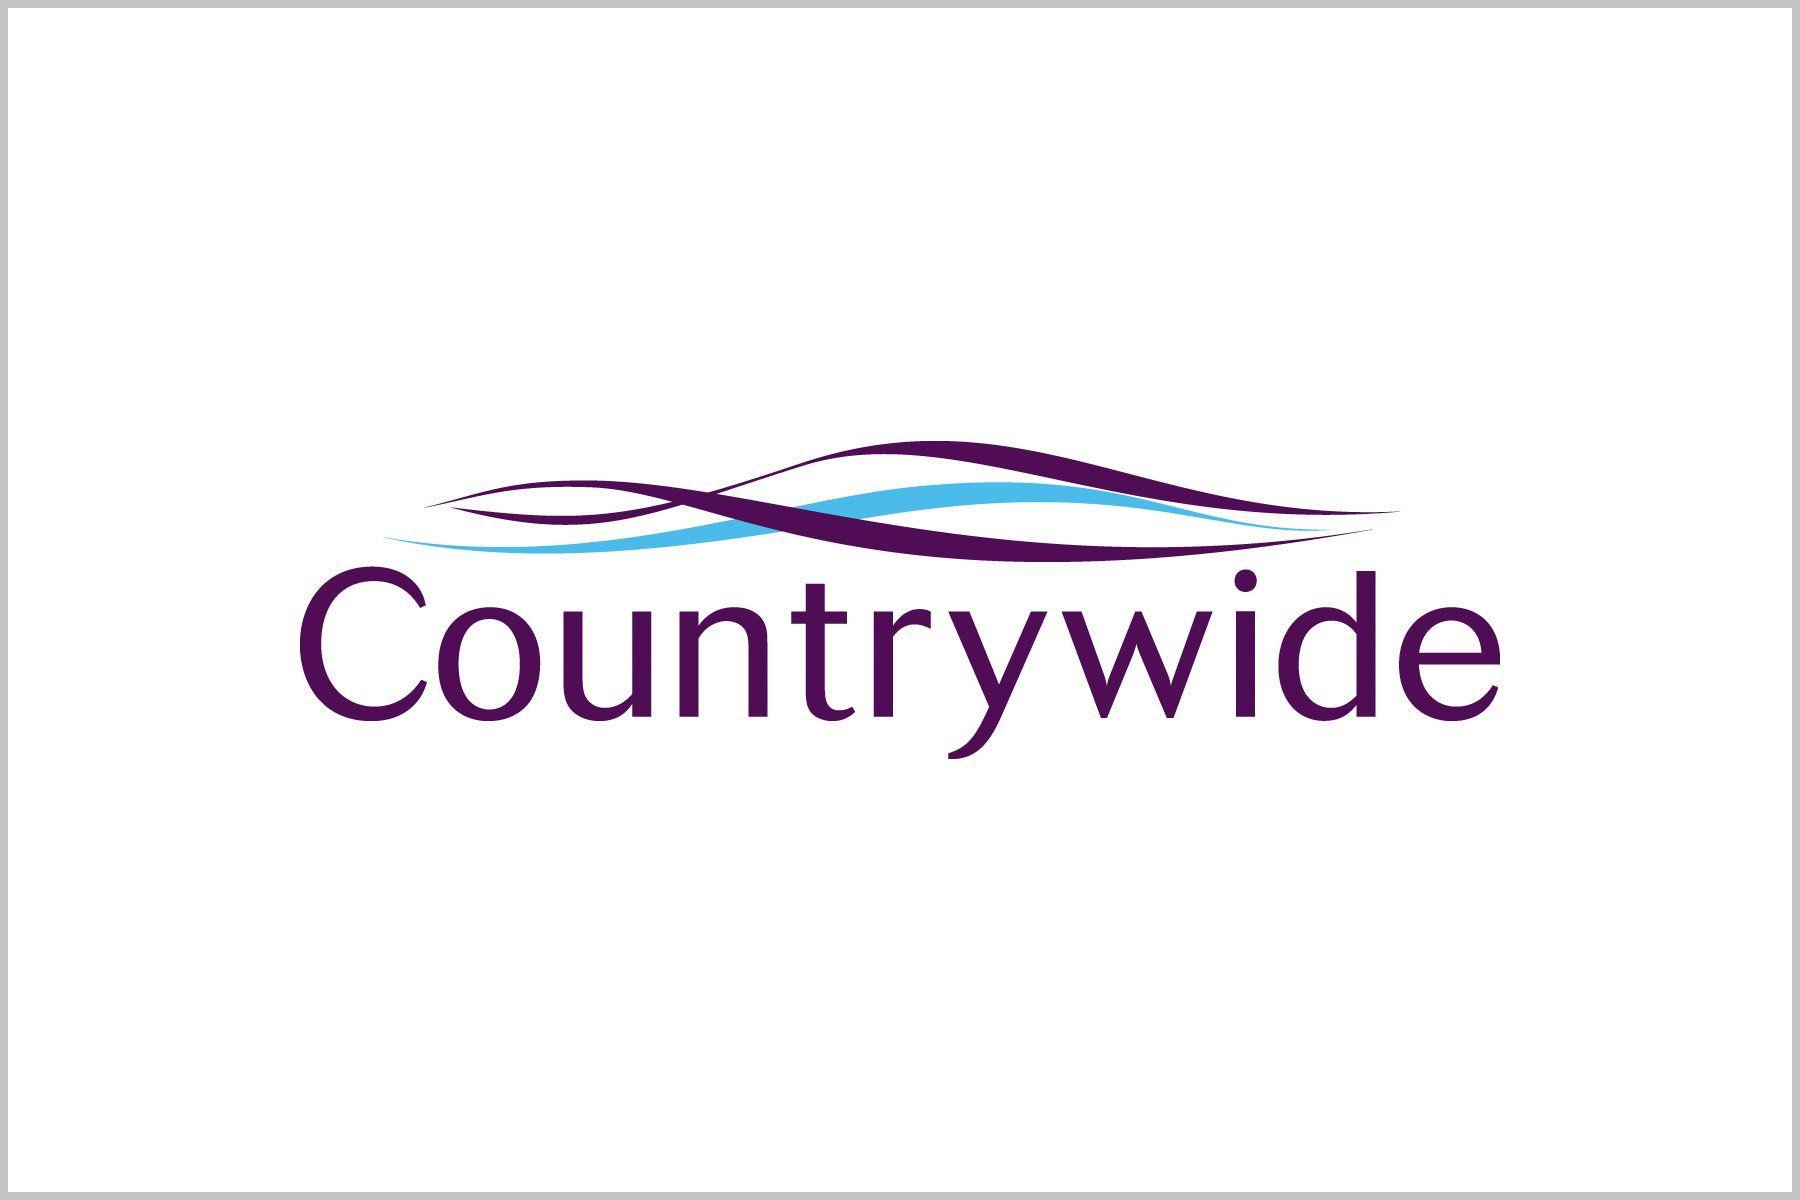 Countrywide Logo - Our brands